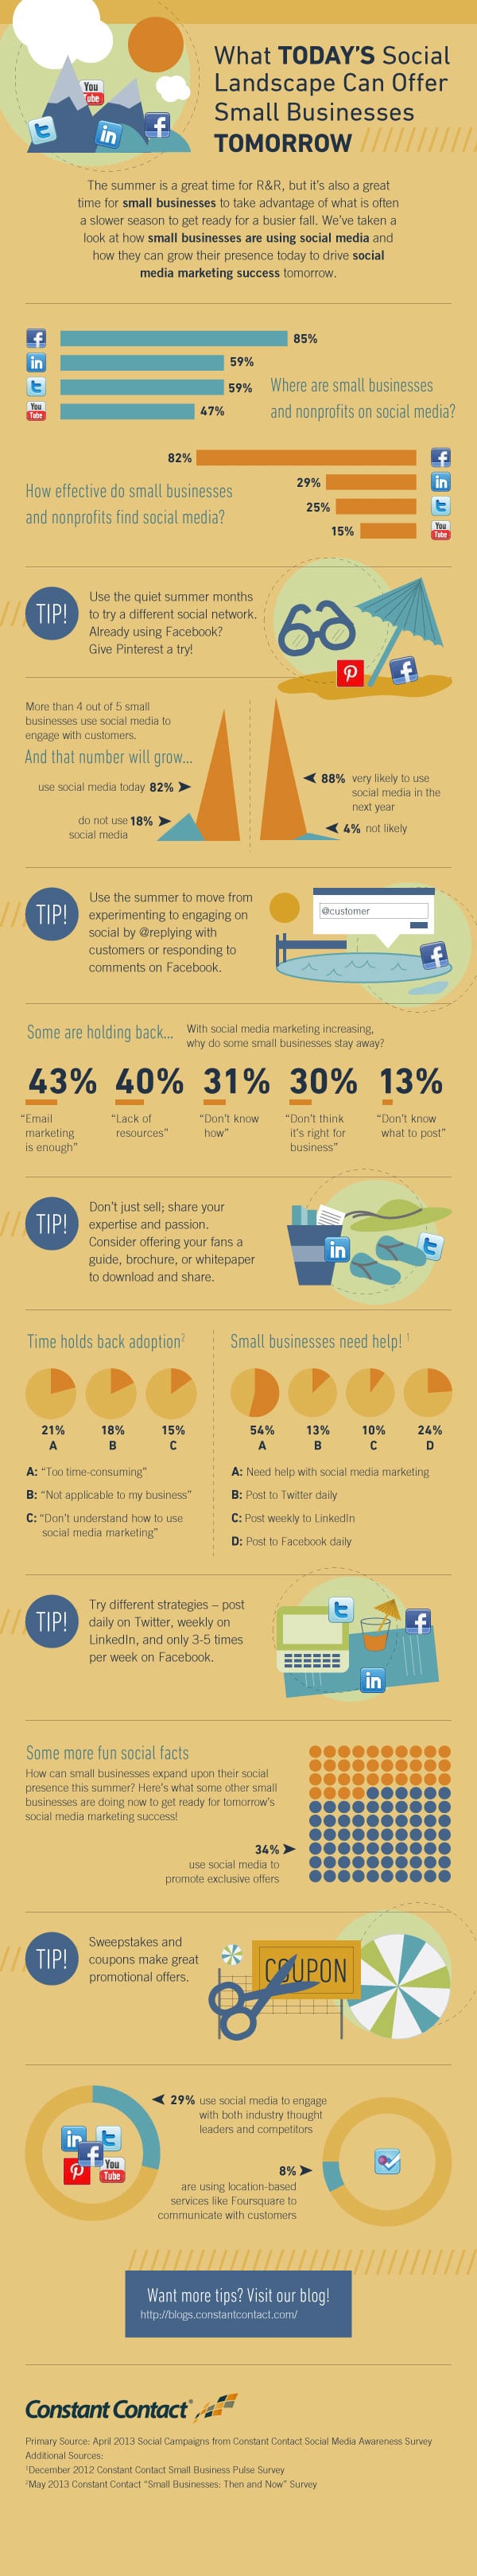 Summer Social Media Tips To Help You Get Ready For Fall [Infographic]